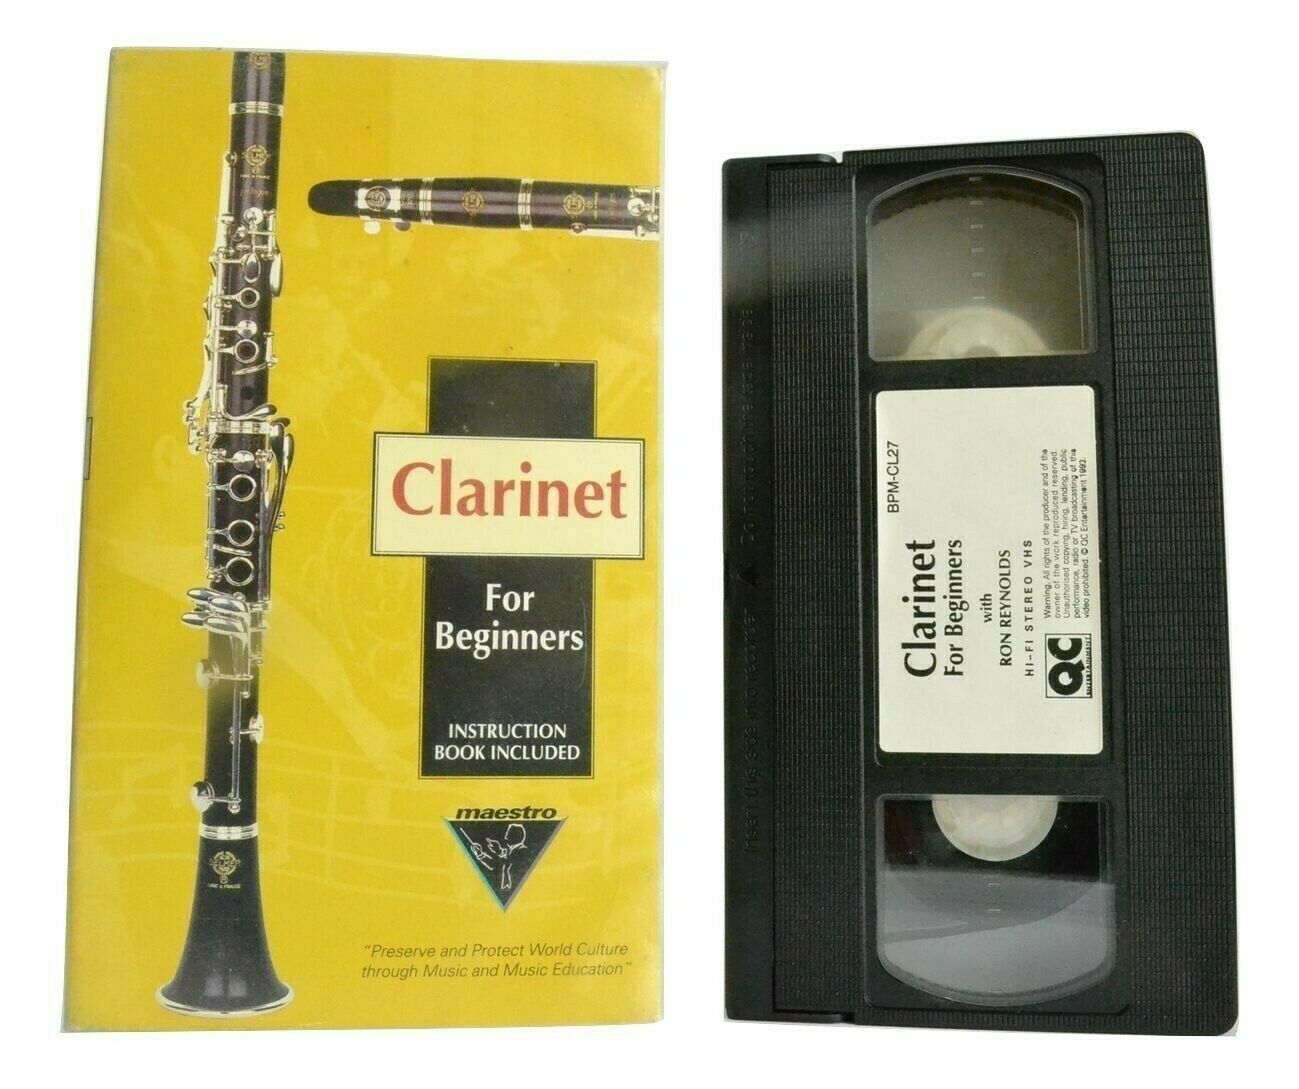 Clarinet For Beginners [Ron Reynolds]: Educational - Music Lessons - Pal VHS-